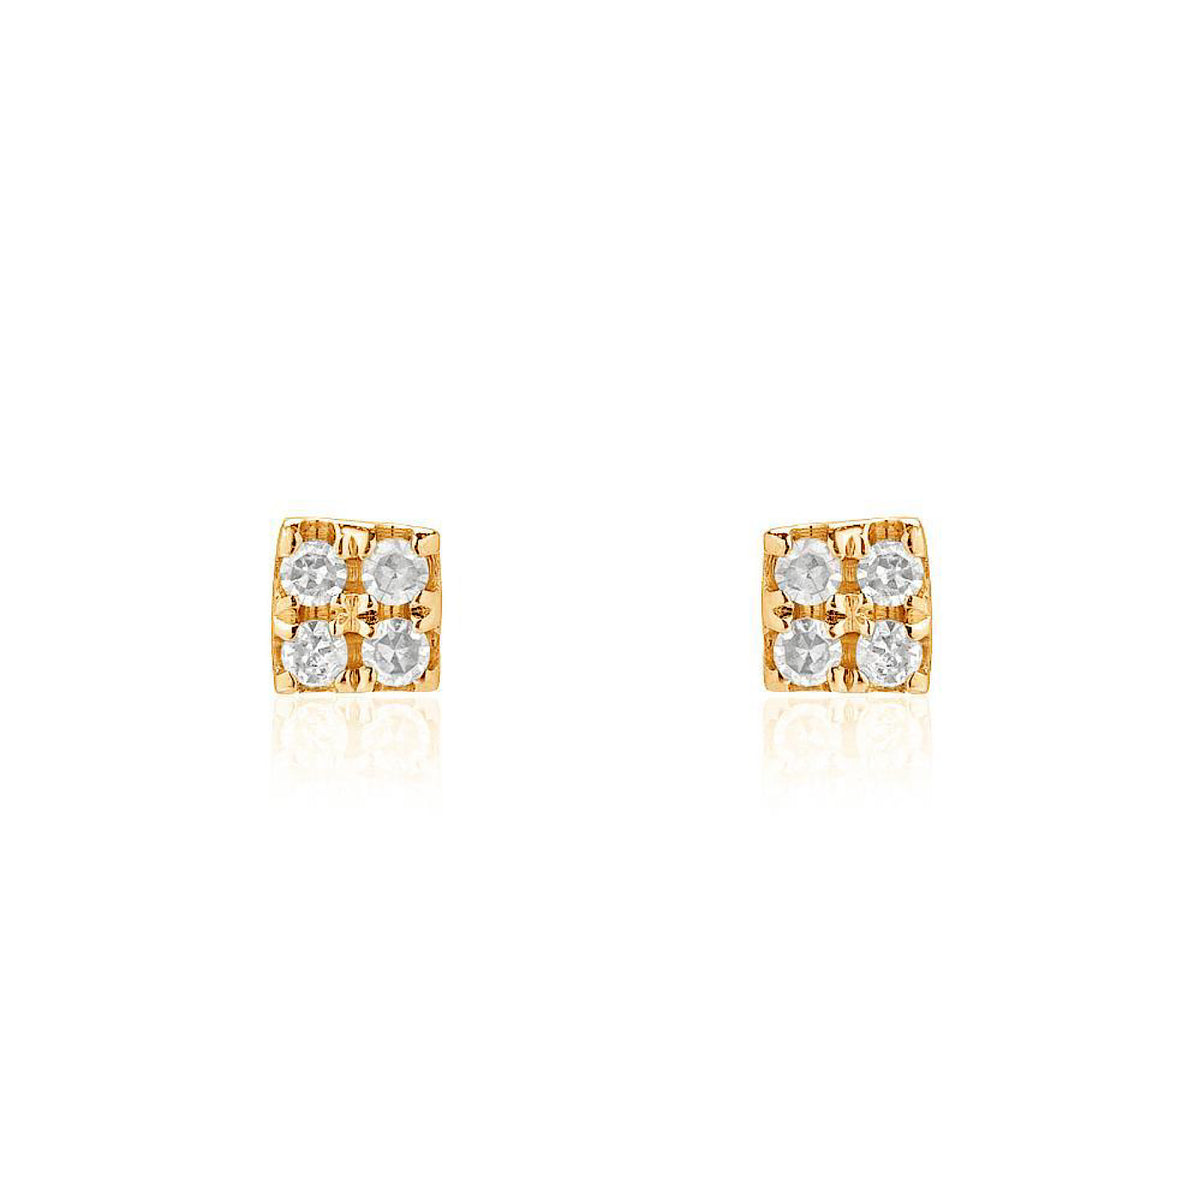 Petite Pave Square Post Earrings, Yellow Gold